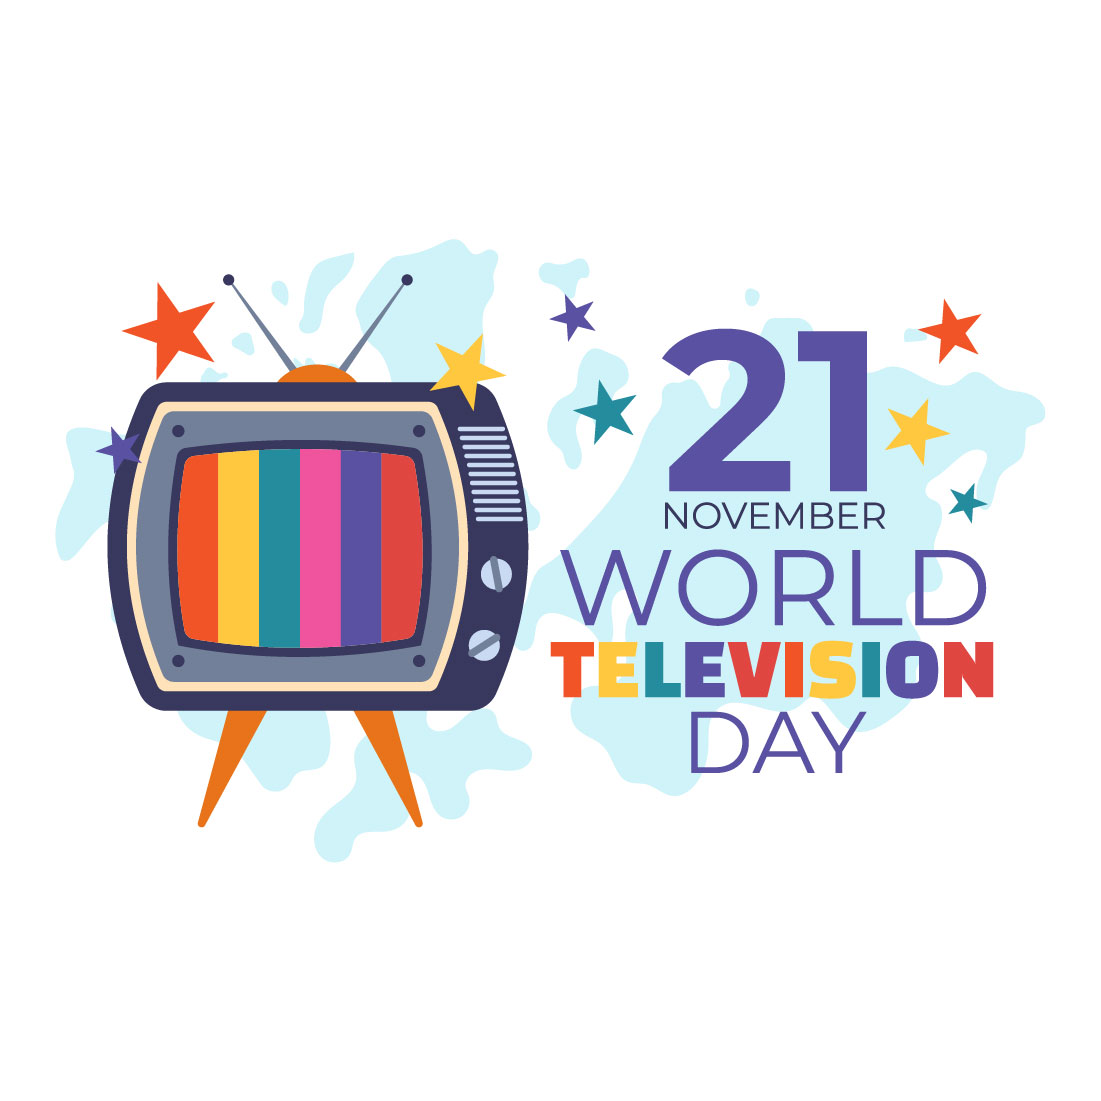 15 World Television Day Illustration preview image.